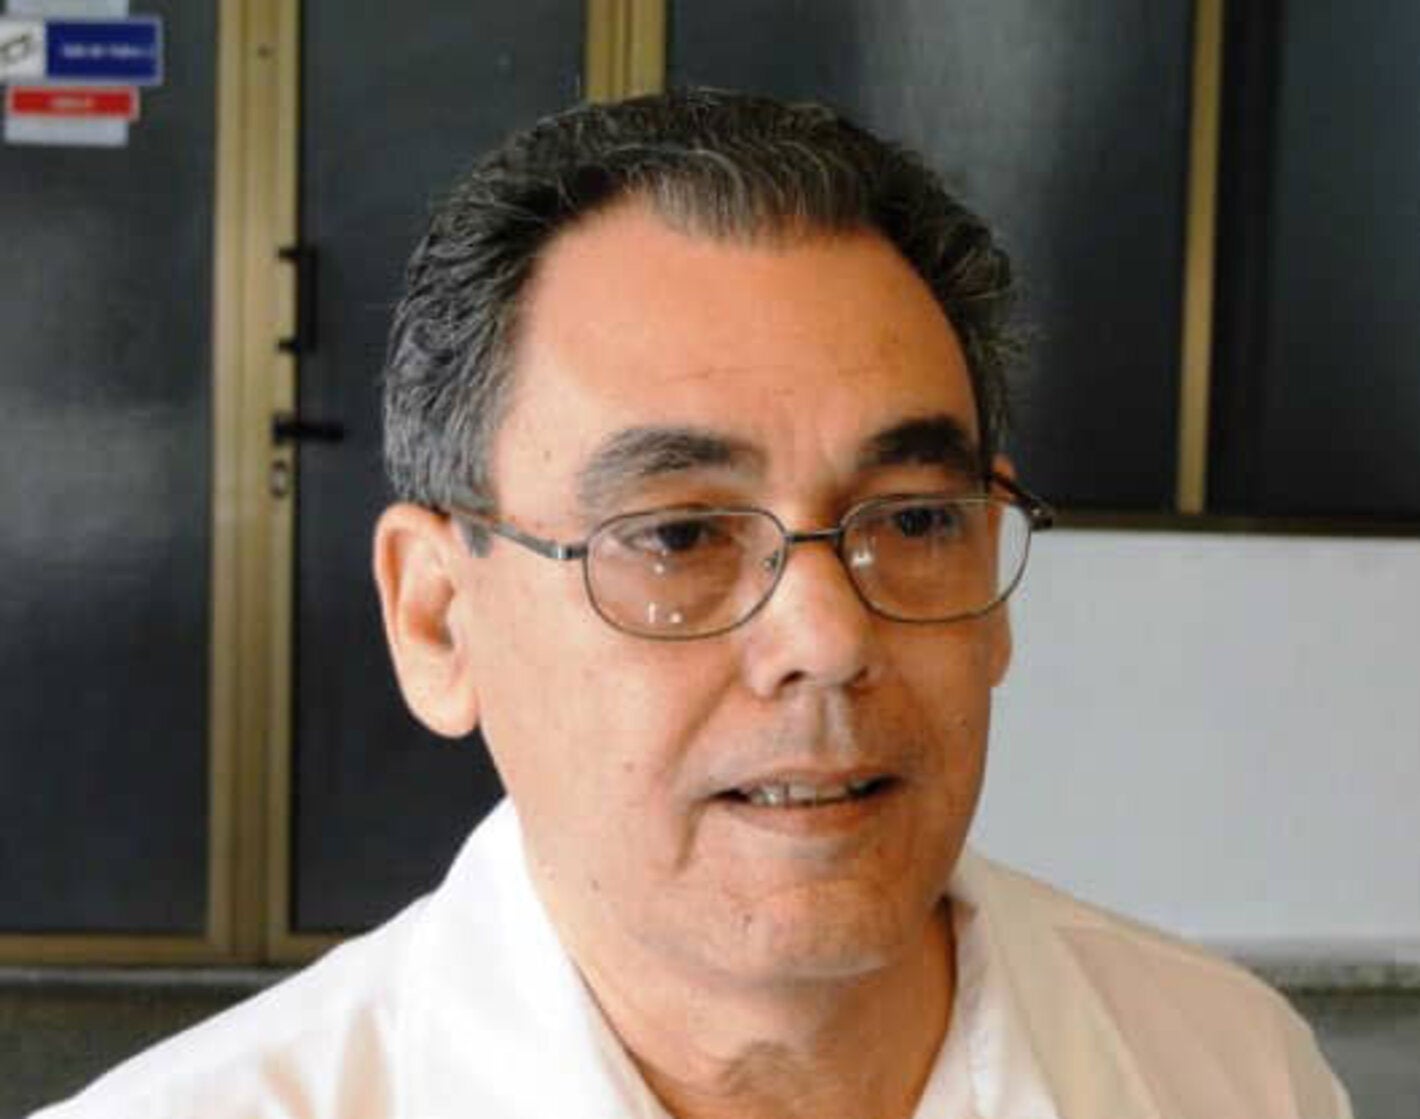 The PAHO Award for Health Services Management and Leadership 2023 has been awarded to Dr. Alfredo Darío Espinosa Brito, of Cuba, for his service to public health.